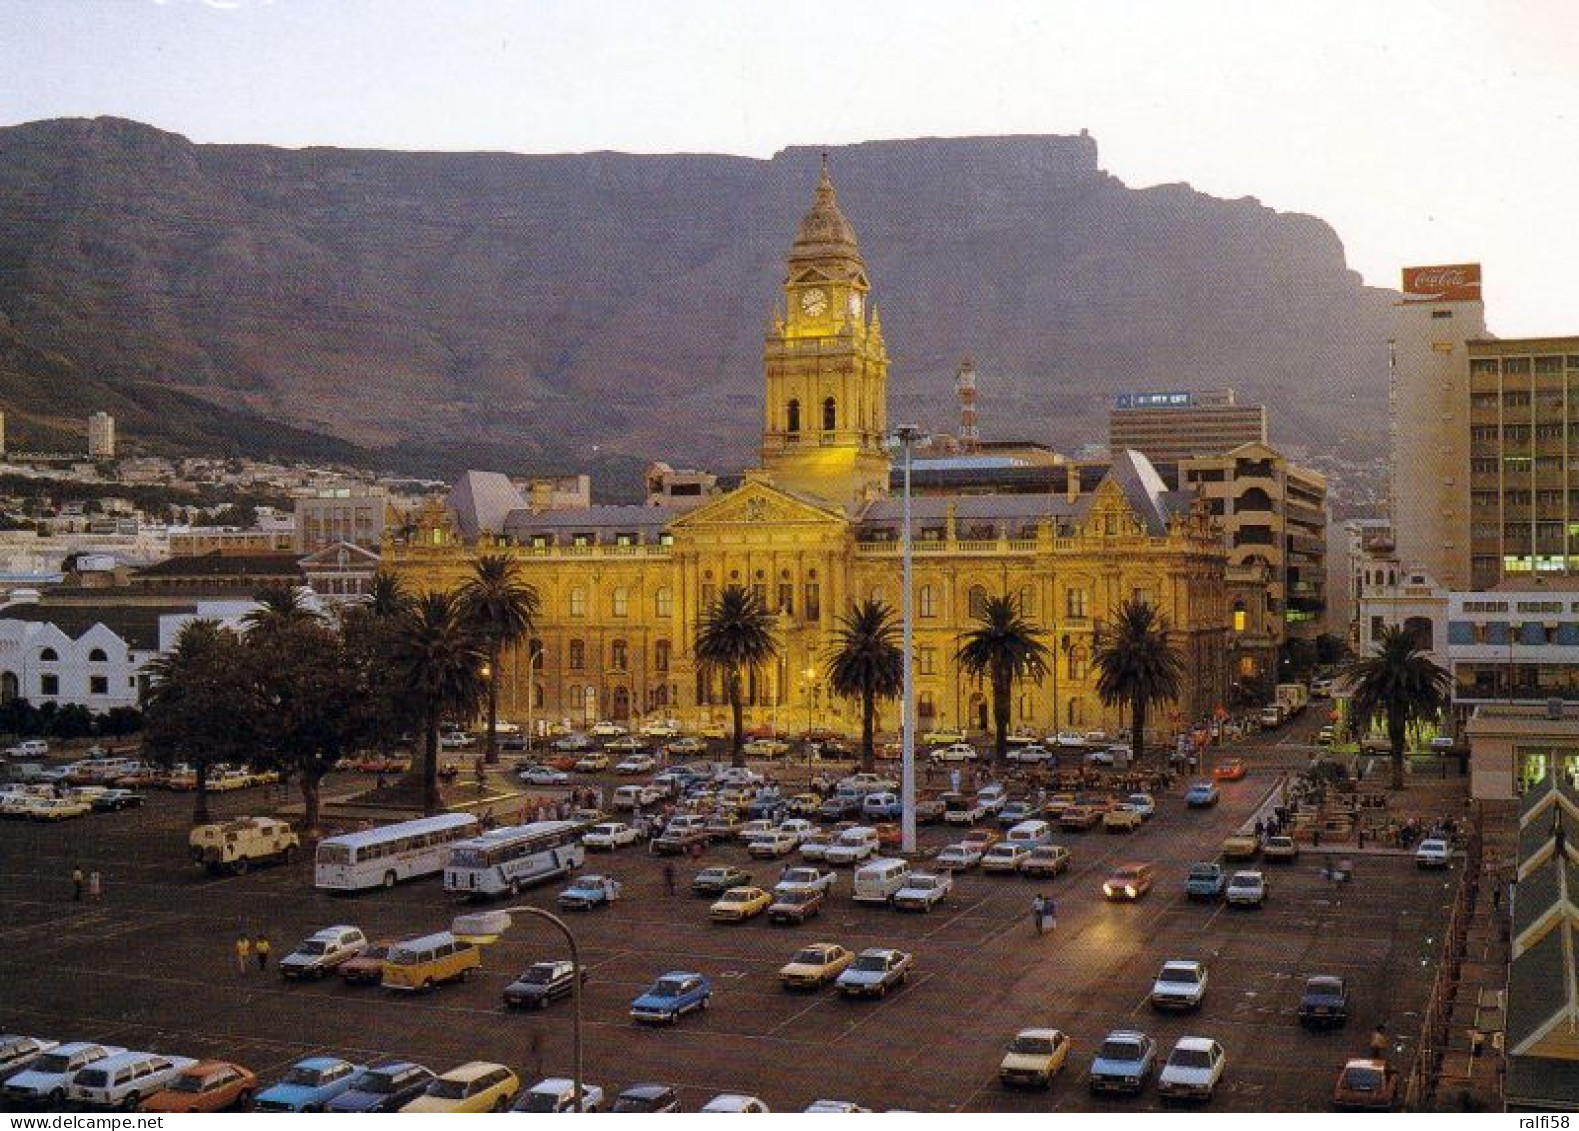 1 AK Südafrika * Das Alte Rathaus In Kapstadt * The Old City Hall Of Cape Town - Erbaut 1905 * - Sud Africa